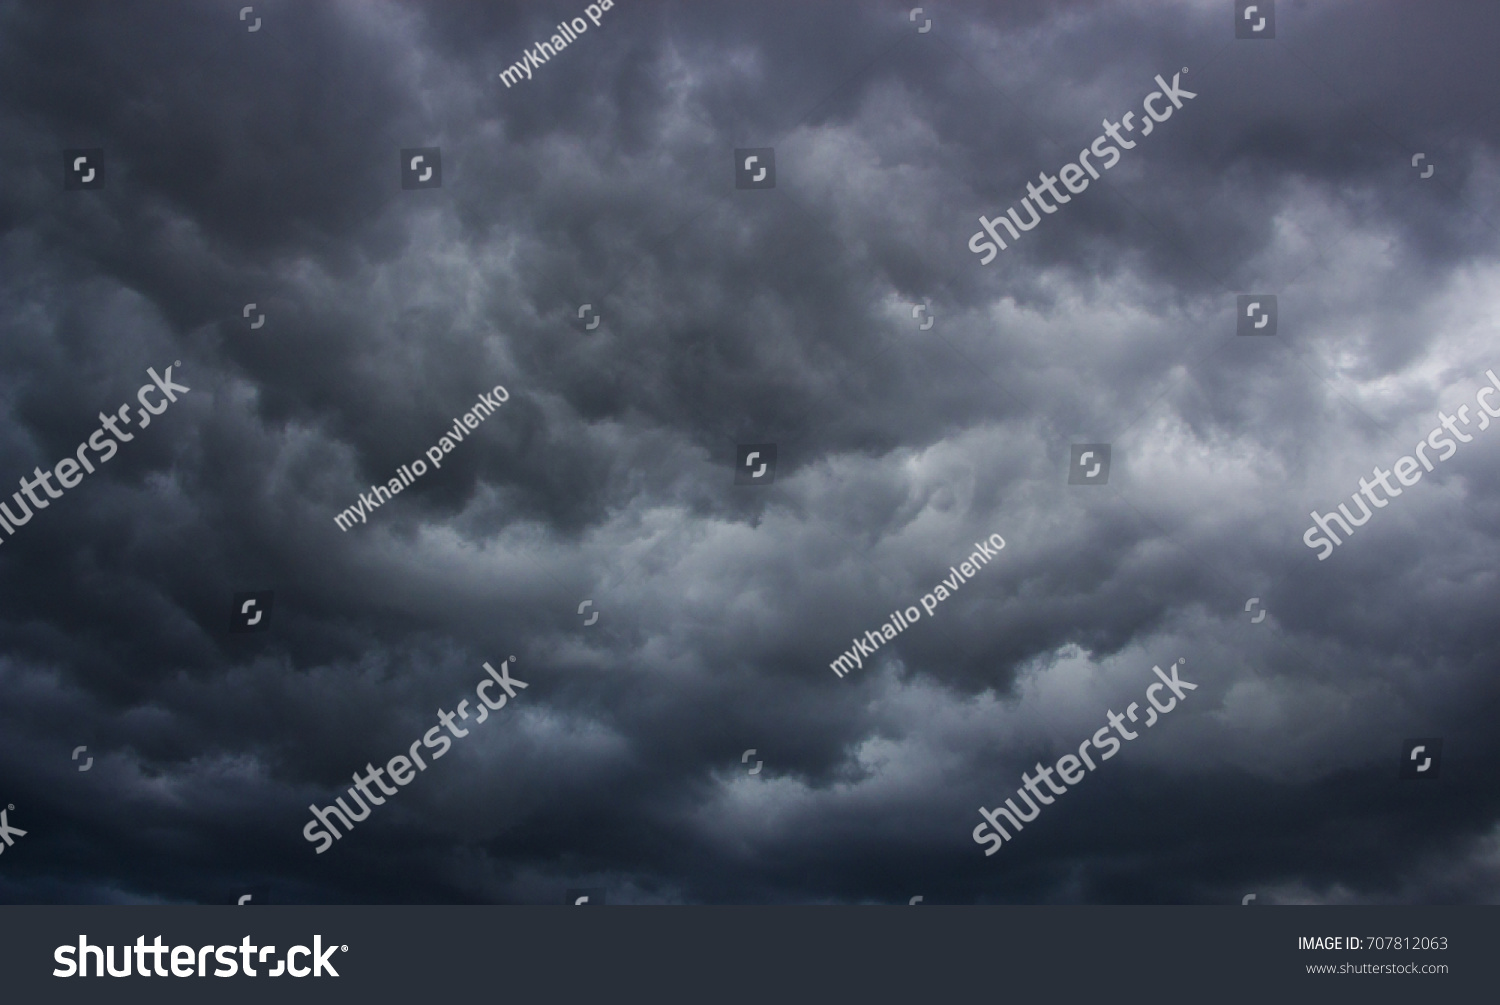 Light in the Dark and Dramatic Storm Clouds background #707812063